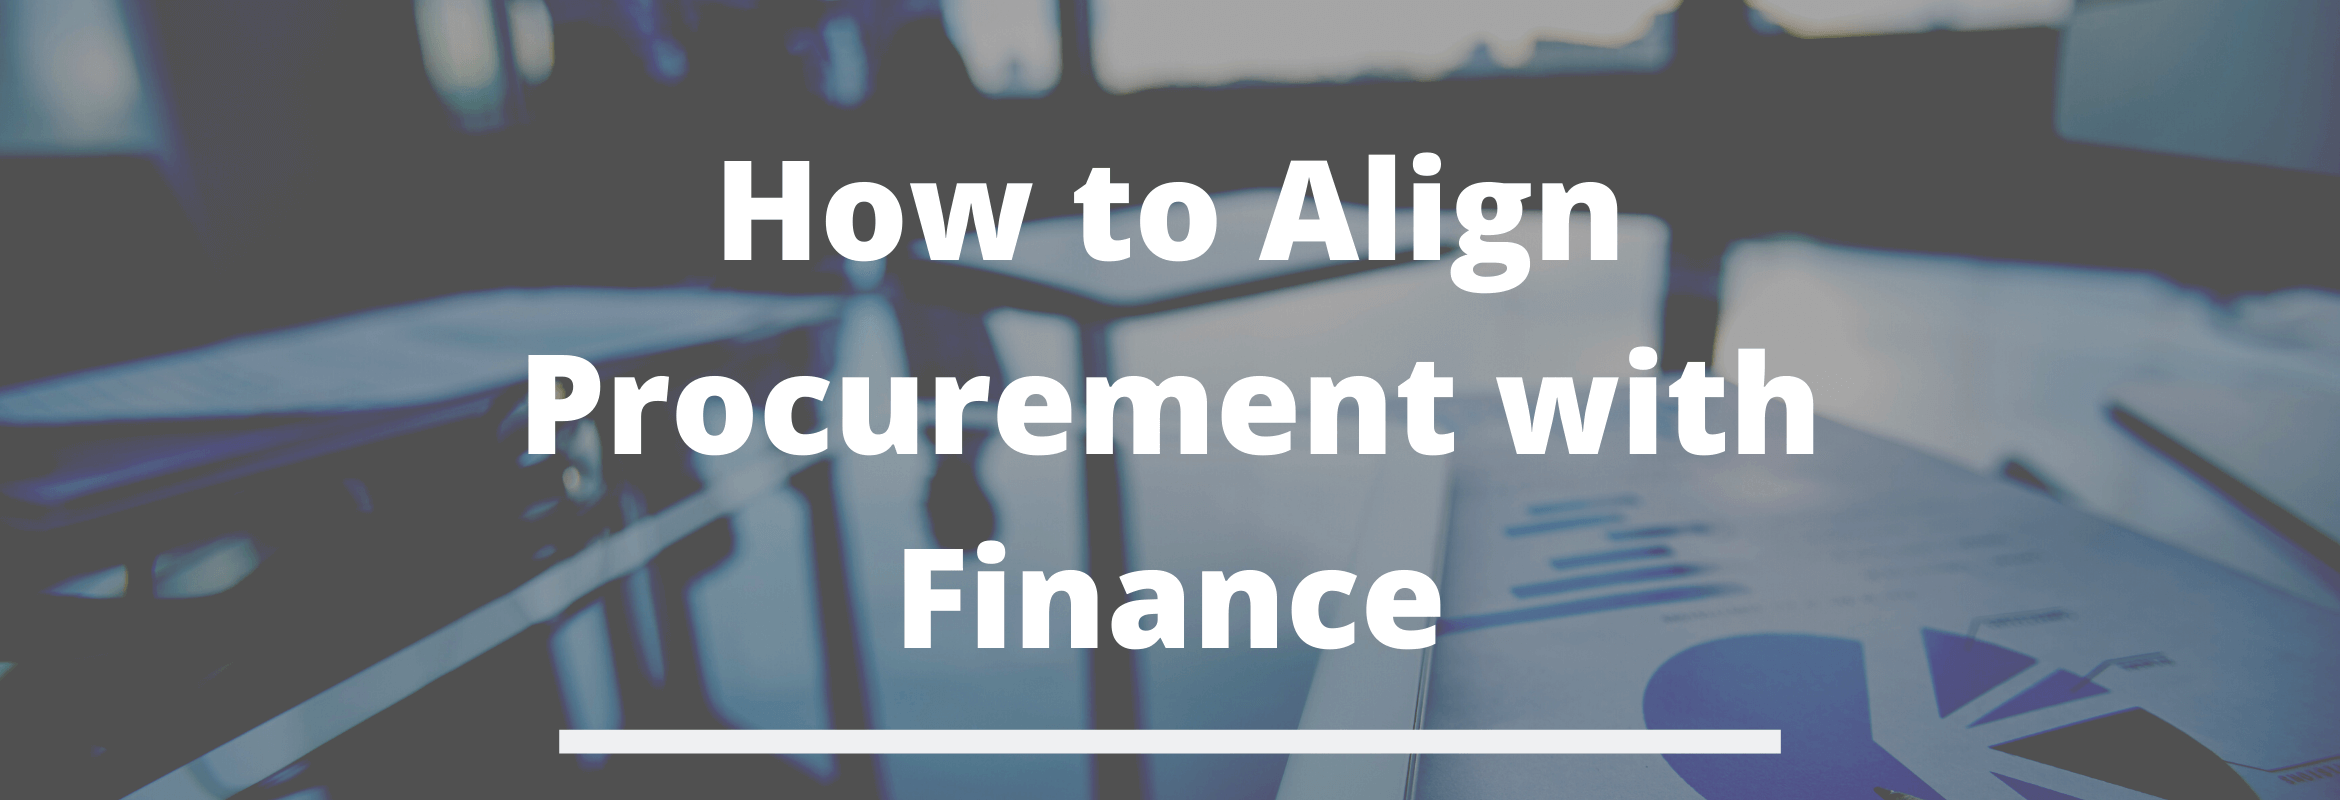 All of these strategies are essential to help procurement succeed in collaborating with finance, but you have a far greater likelihood of success if you select the right tools. Choose a digital solution that offers robust reporting, enhances visibility, and enables real-time engagement.